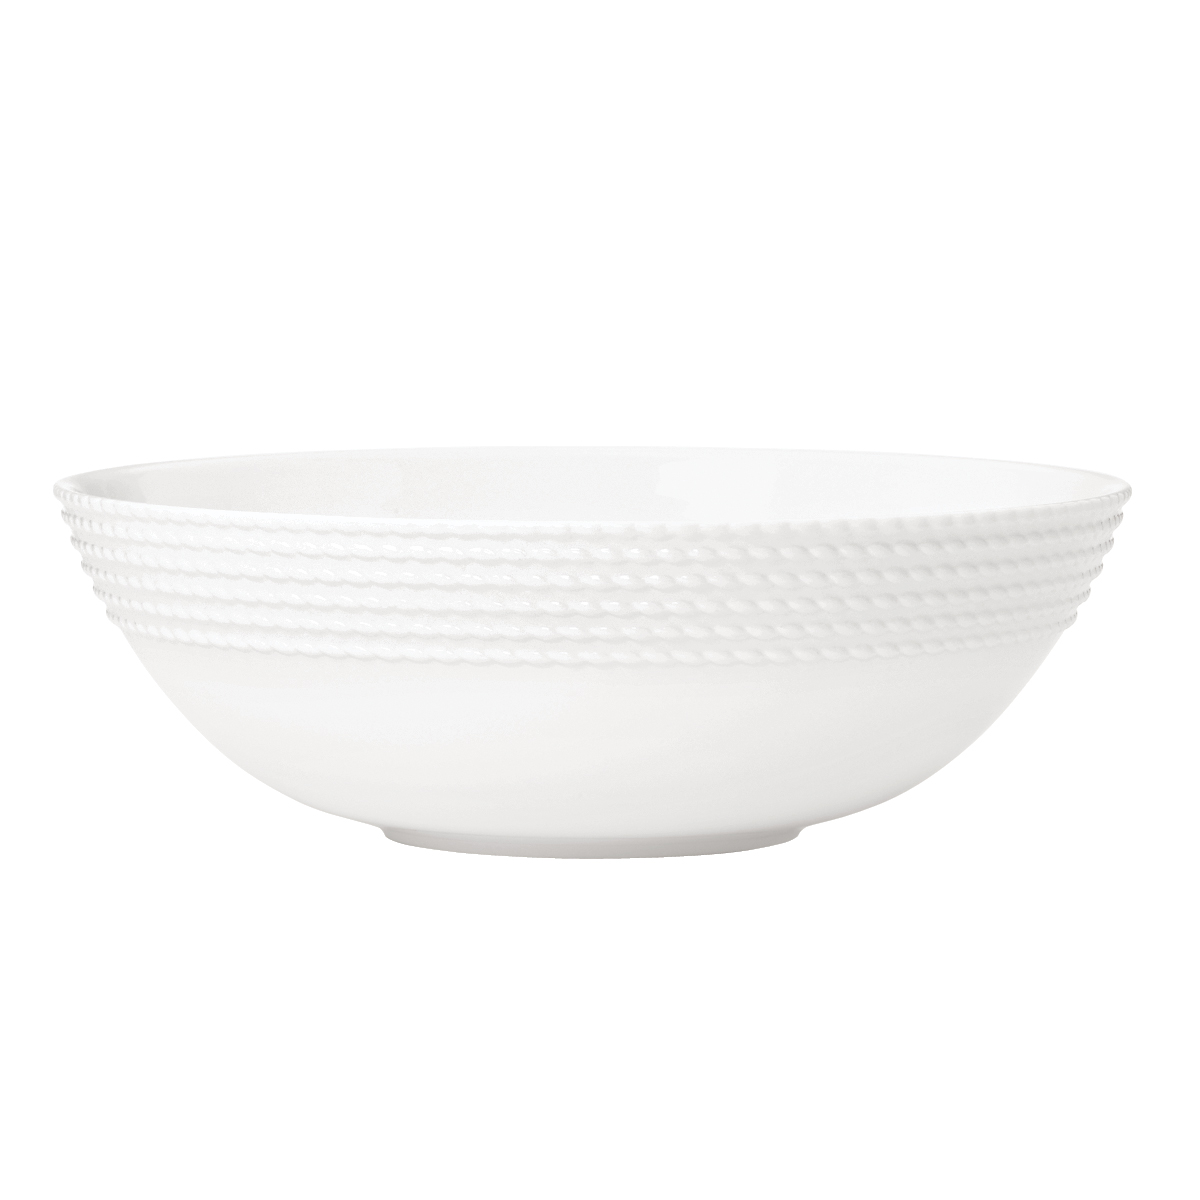 Kate Spade China by Lenox, Wickford Serving Bowl